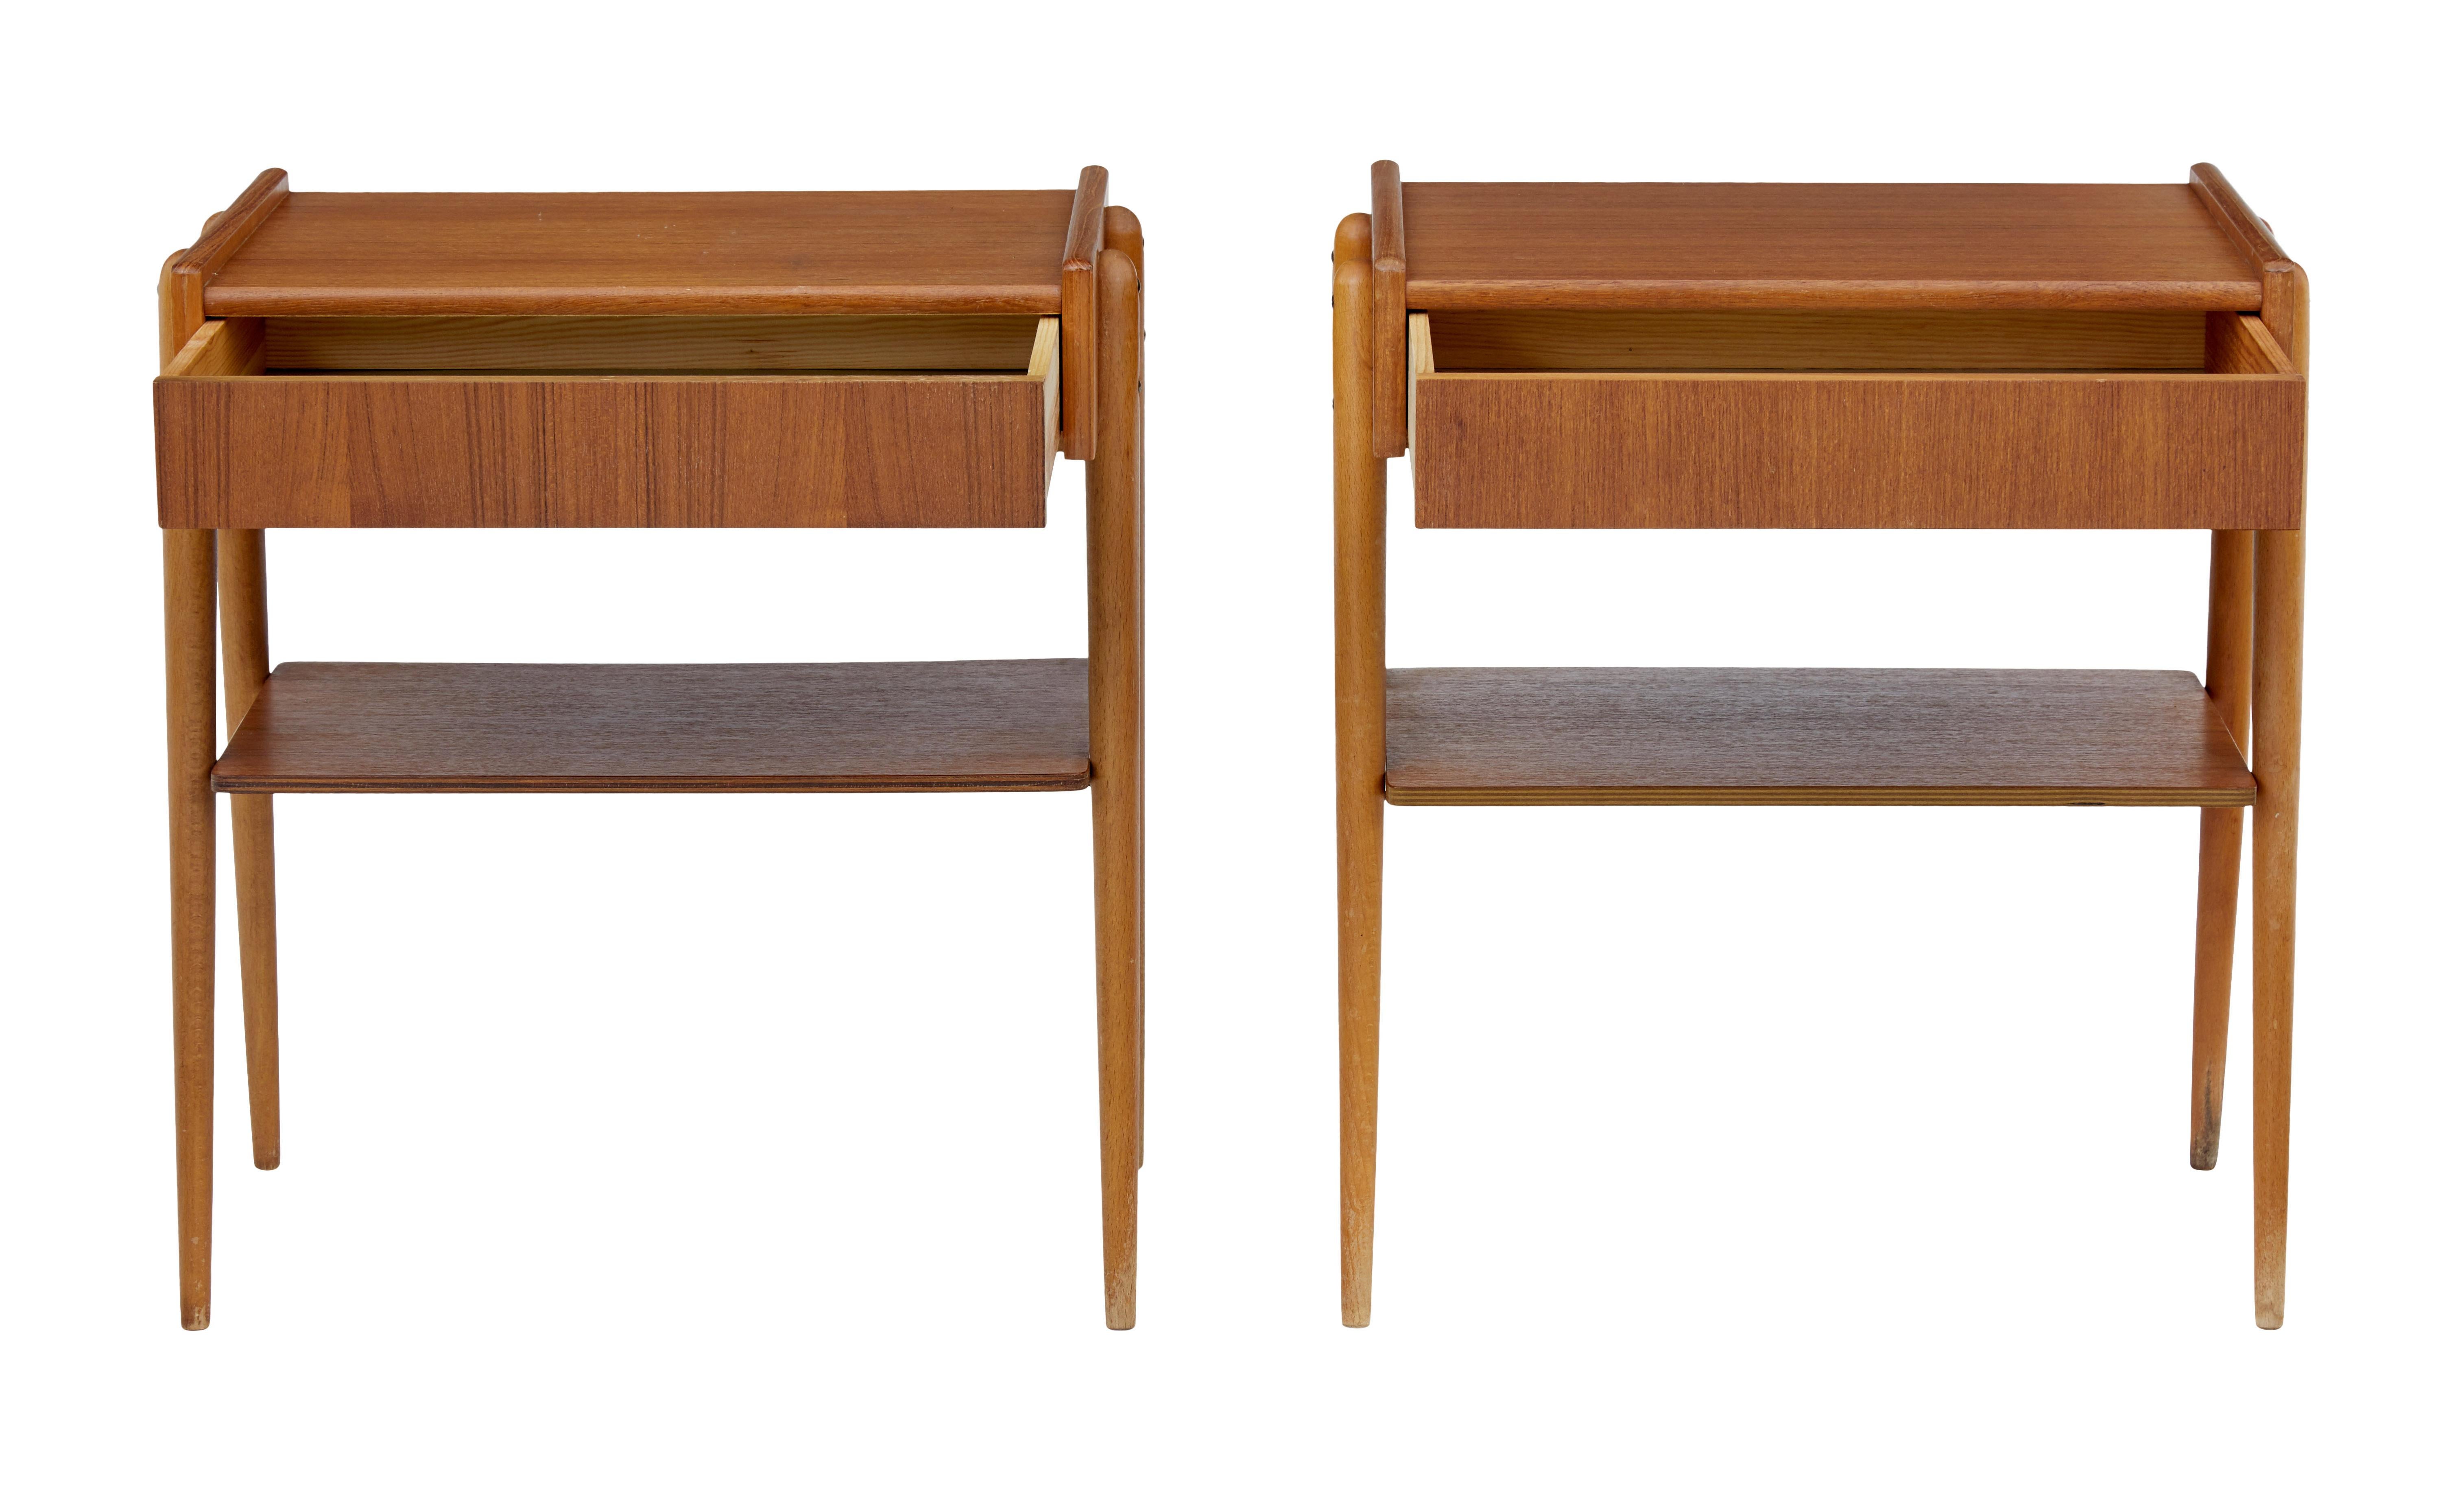 Pair of Danish teak bedside tables, circa 1960.

Single drawer to the front, which opens from the bottom so not to spoil the design. Solid teak leg frames which allows a single shelf to fit between the legs.

Minor surface marks and fading to